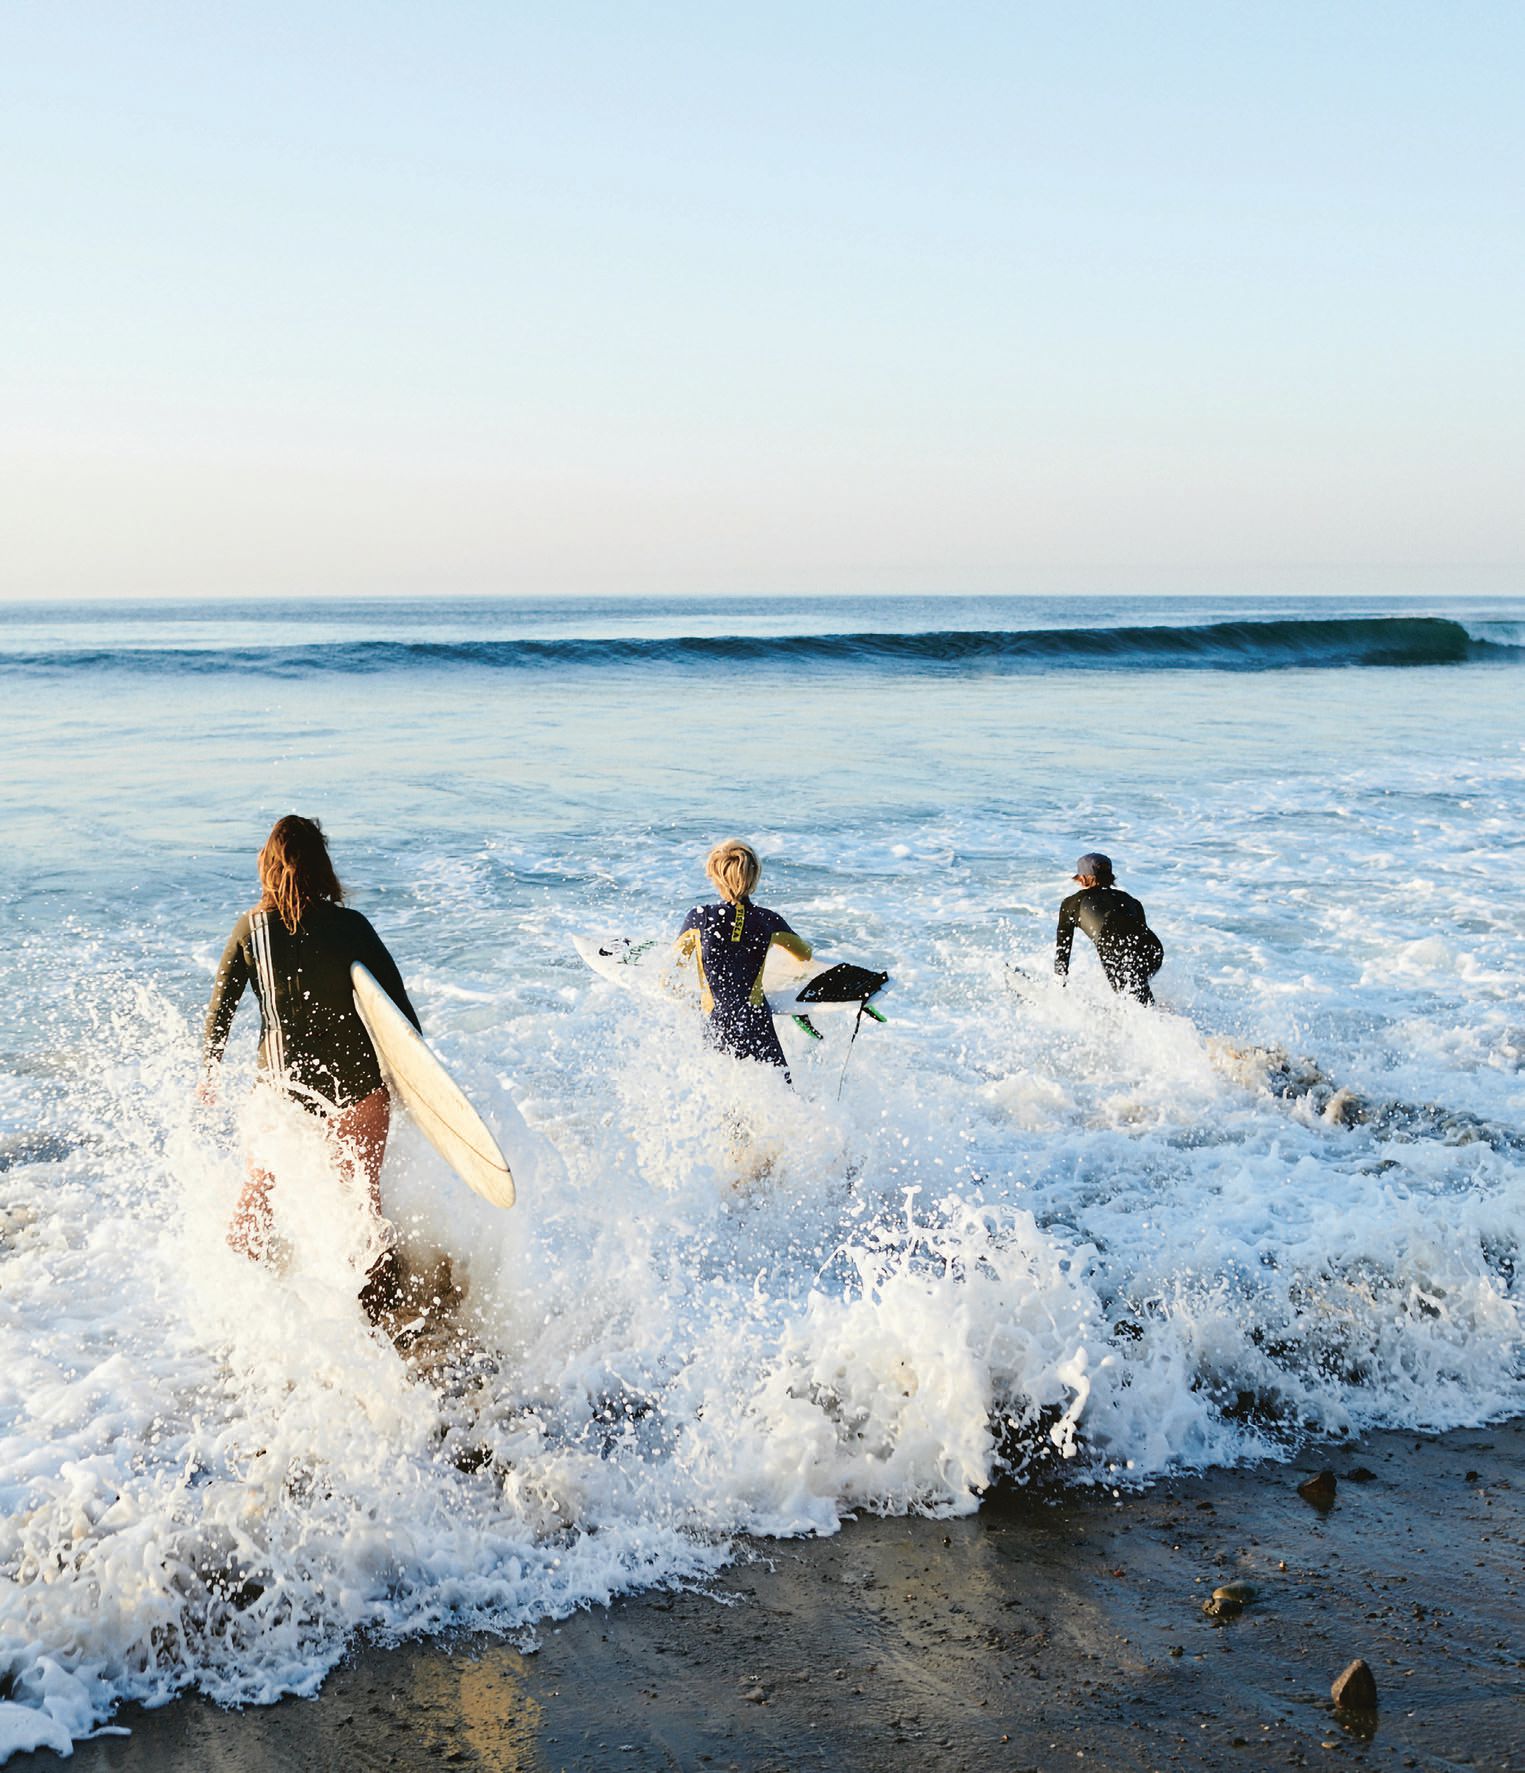 Venice Beach resident Megan Crawford (far left) is one of the female surfers profiled. PHOTO BY ANNE MENKE